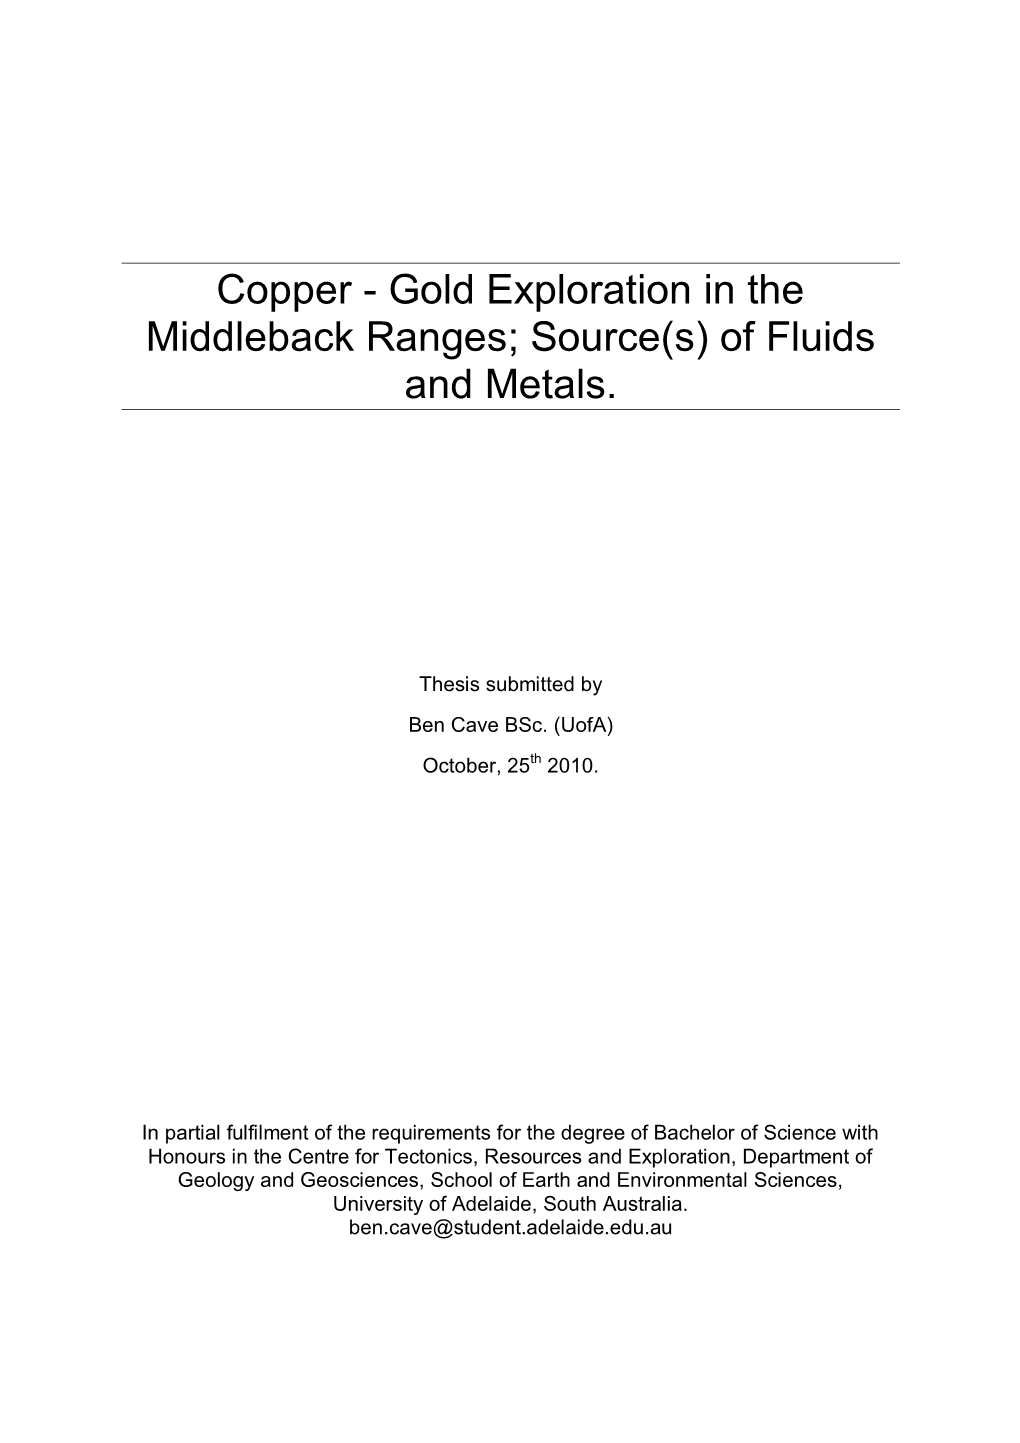 Copper - Gold Exploration in the Middleback Ranges; Source(S) of Fluids and Metals